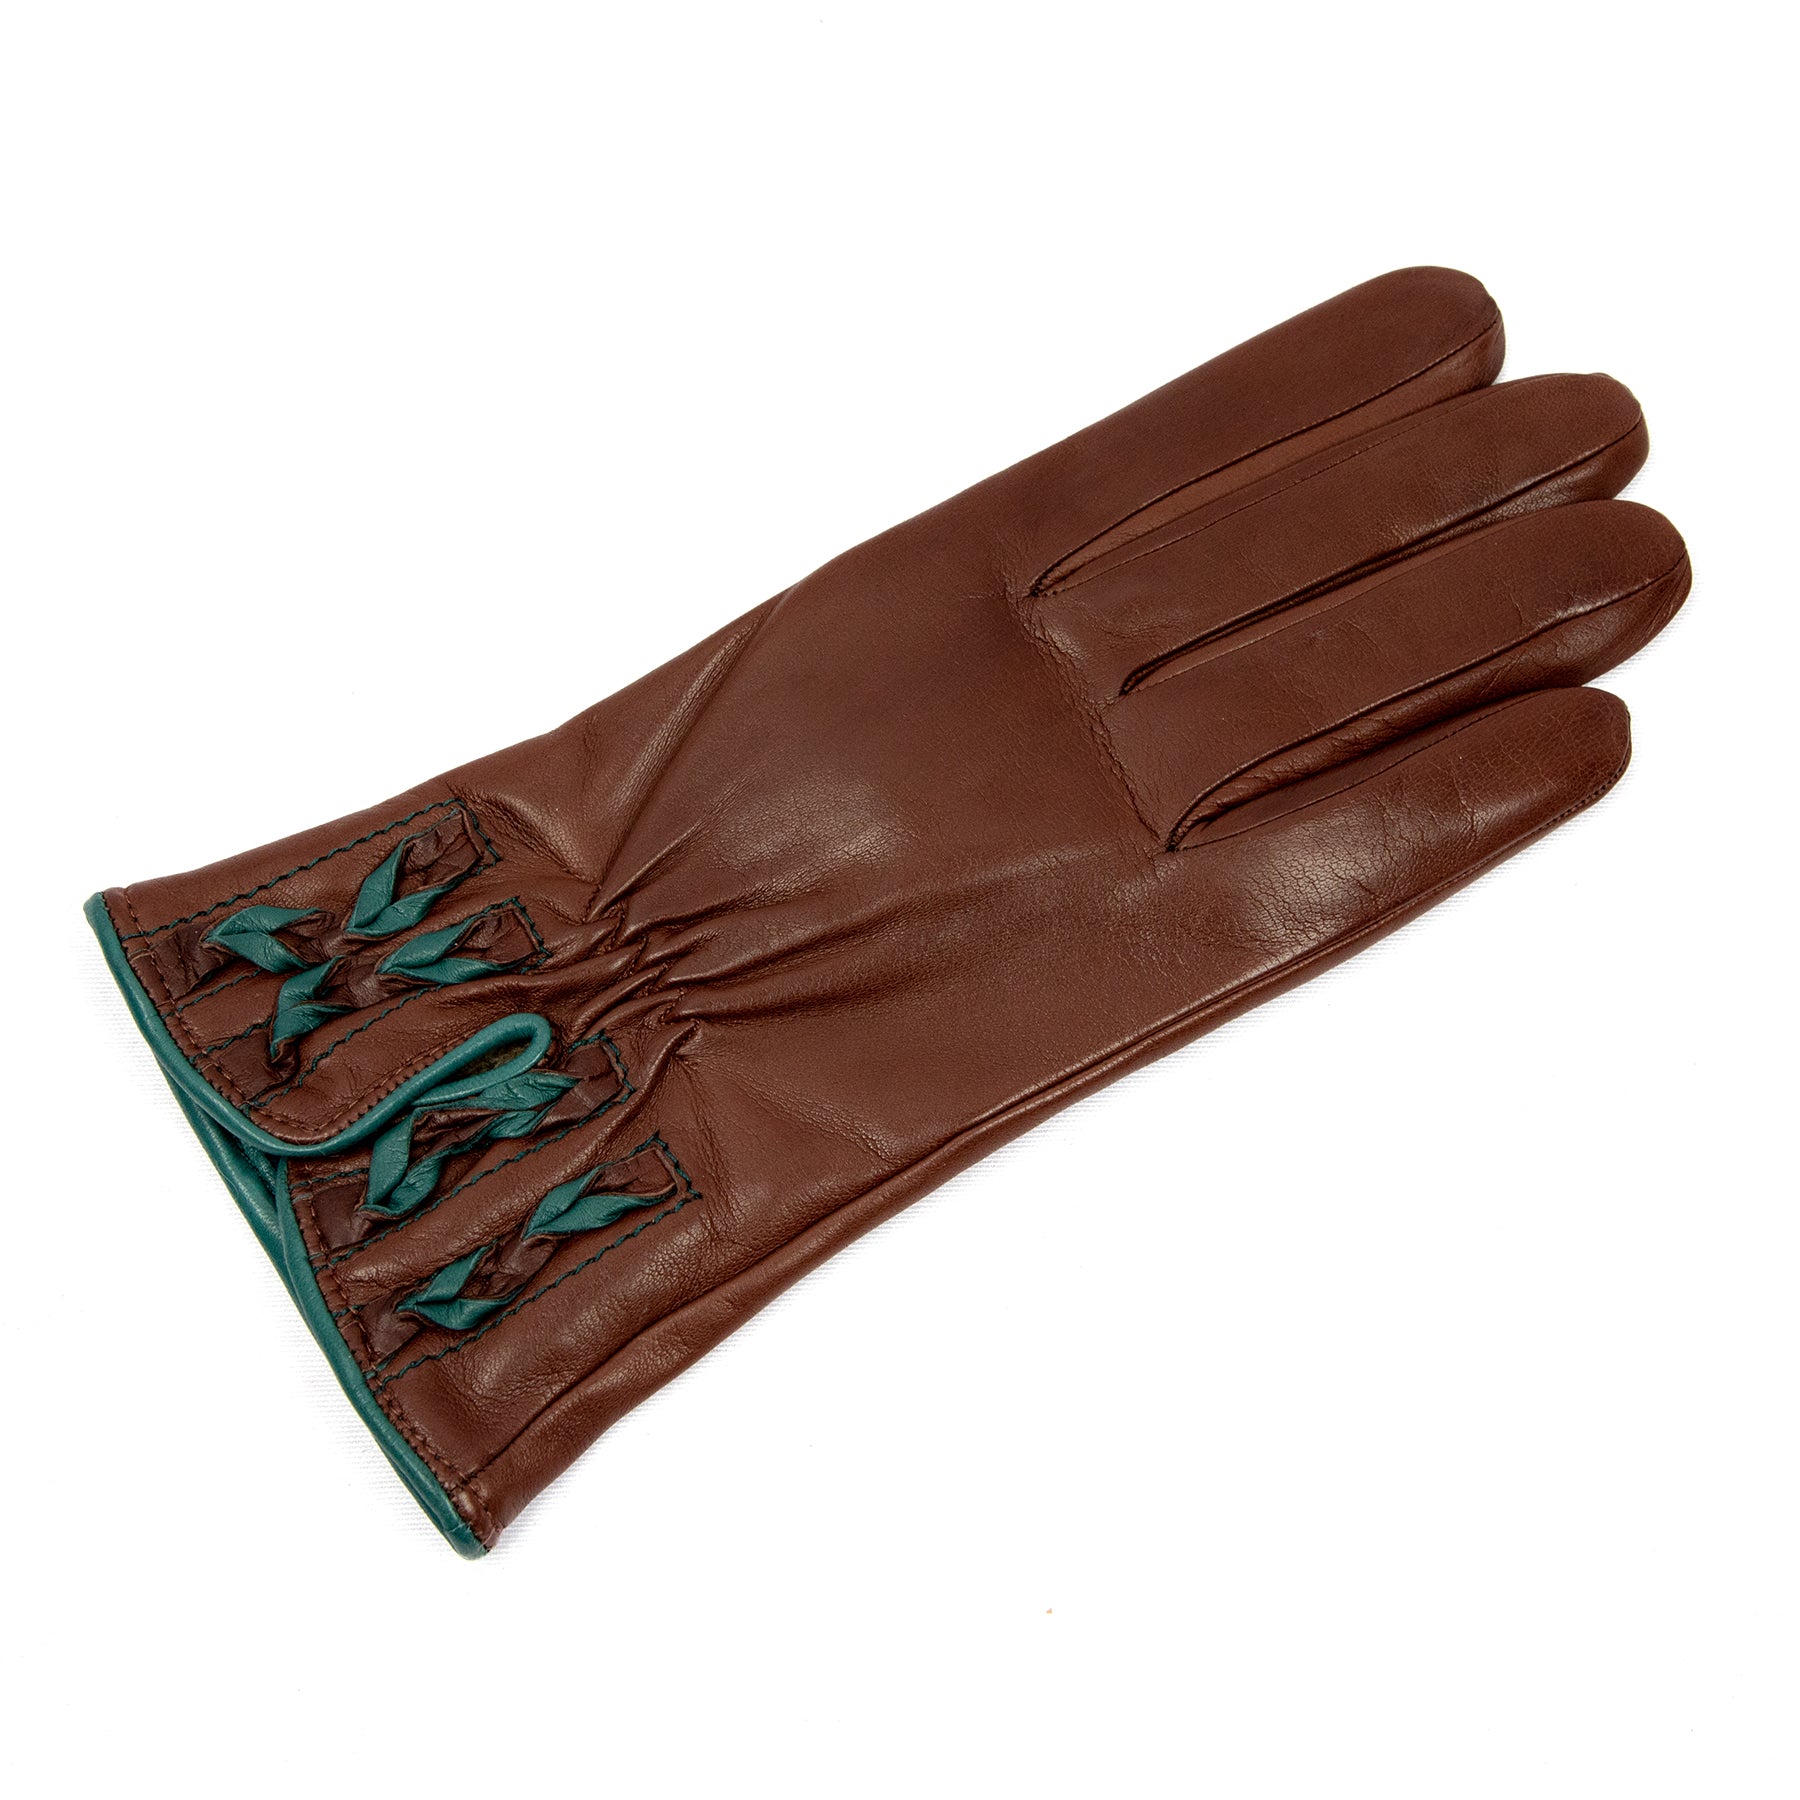 Woman's brown nappa leather gloves and bicolour braided cuff